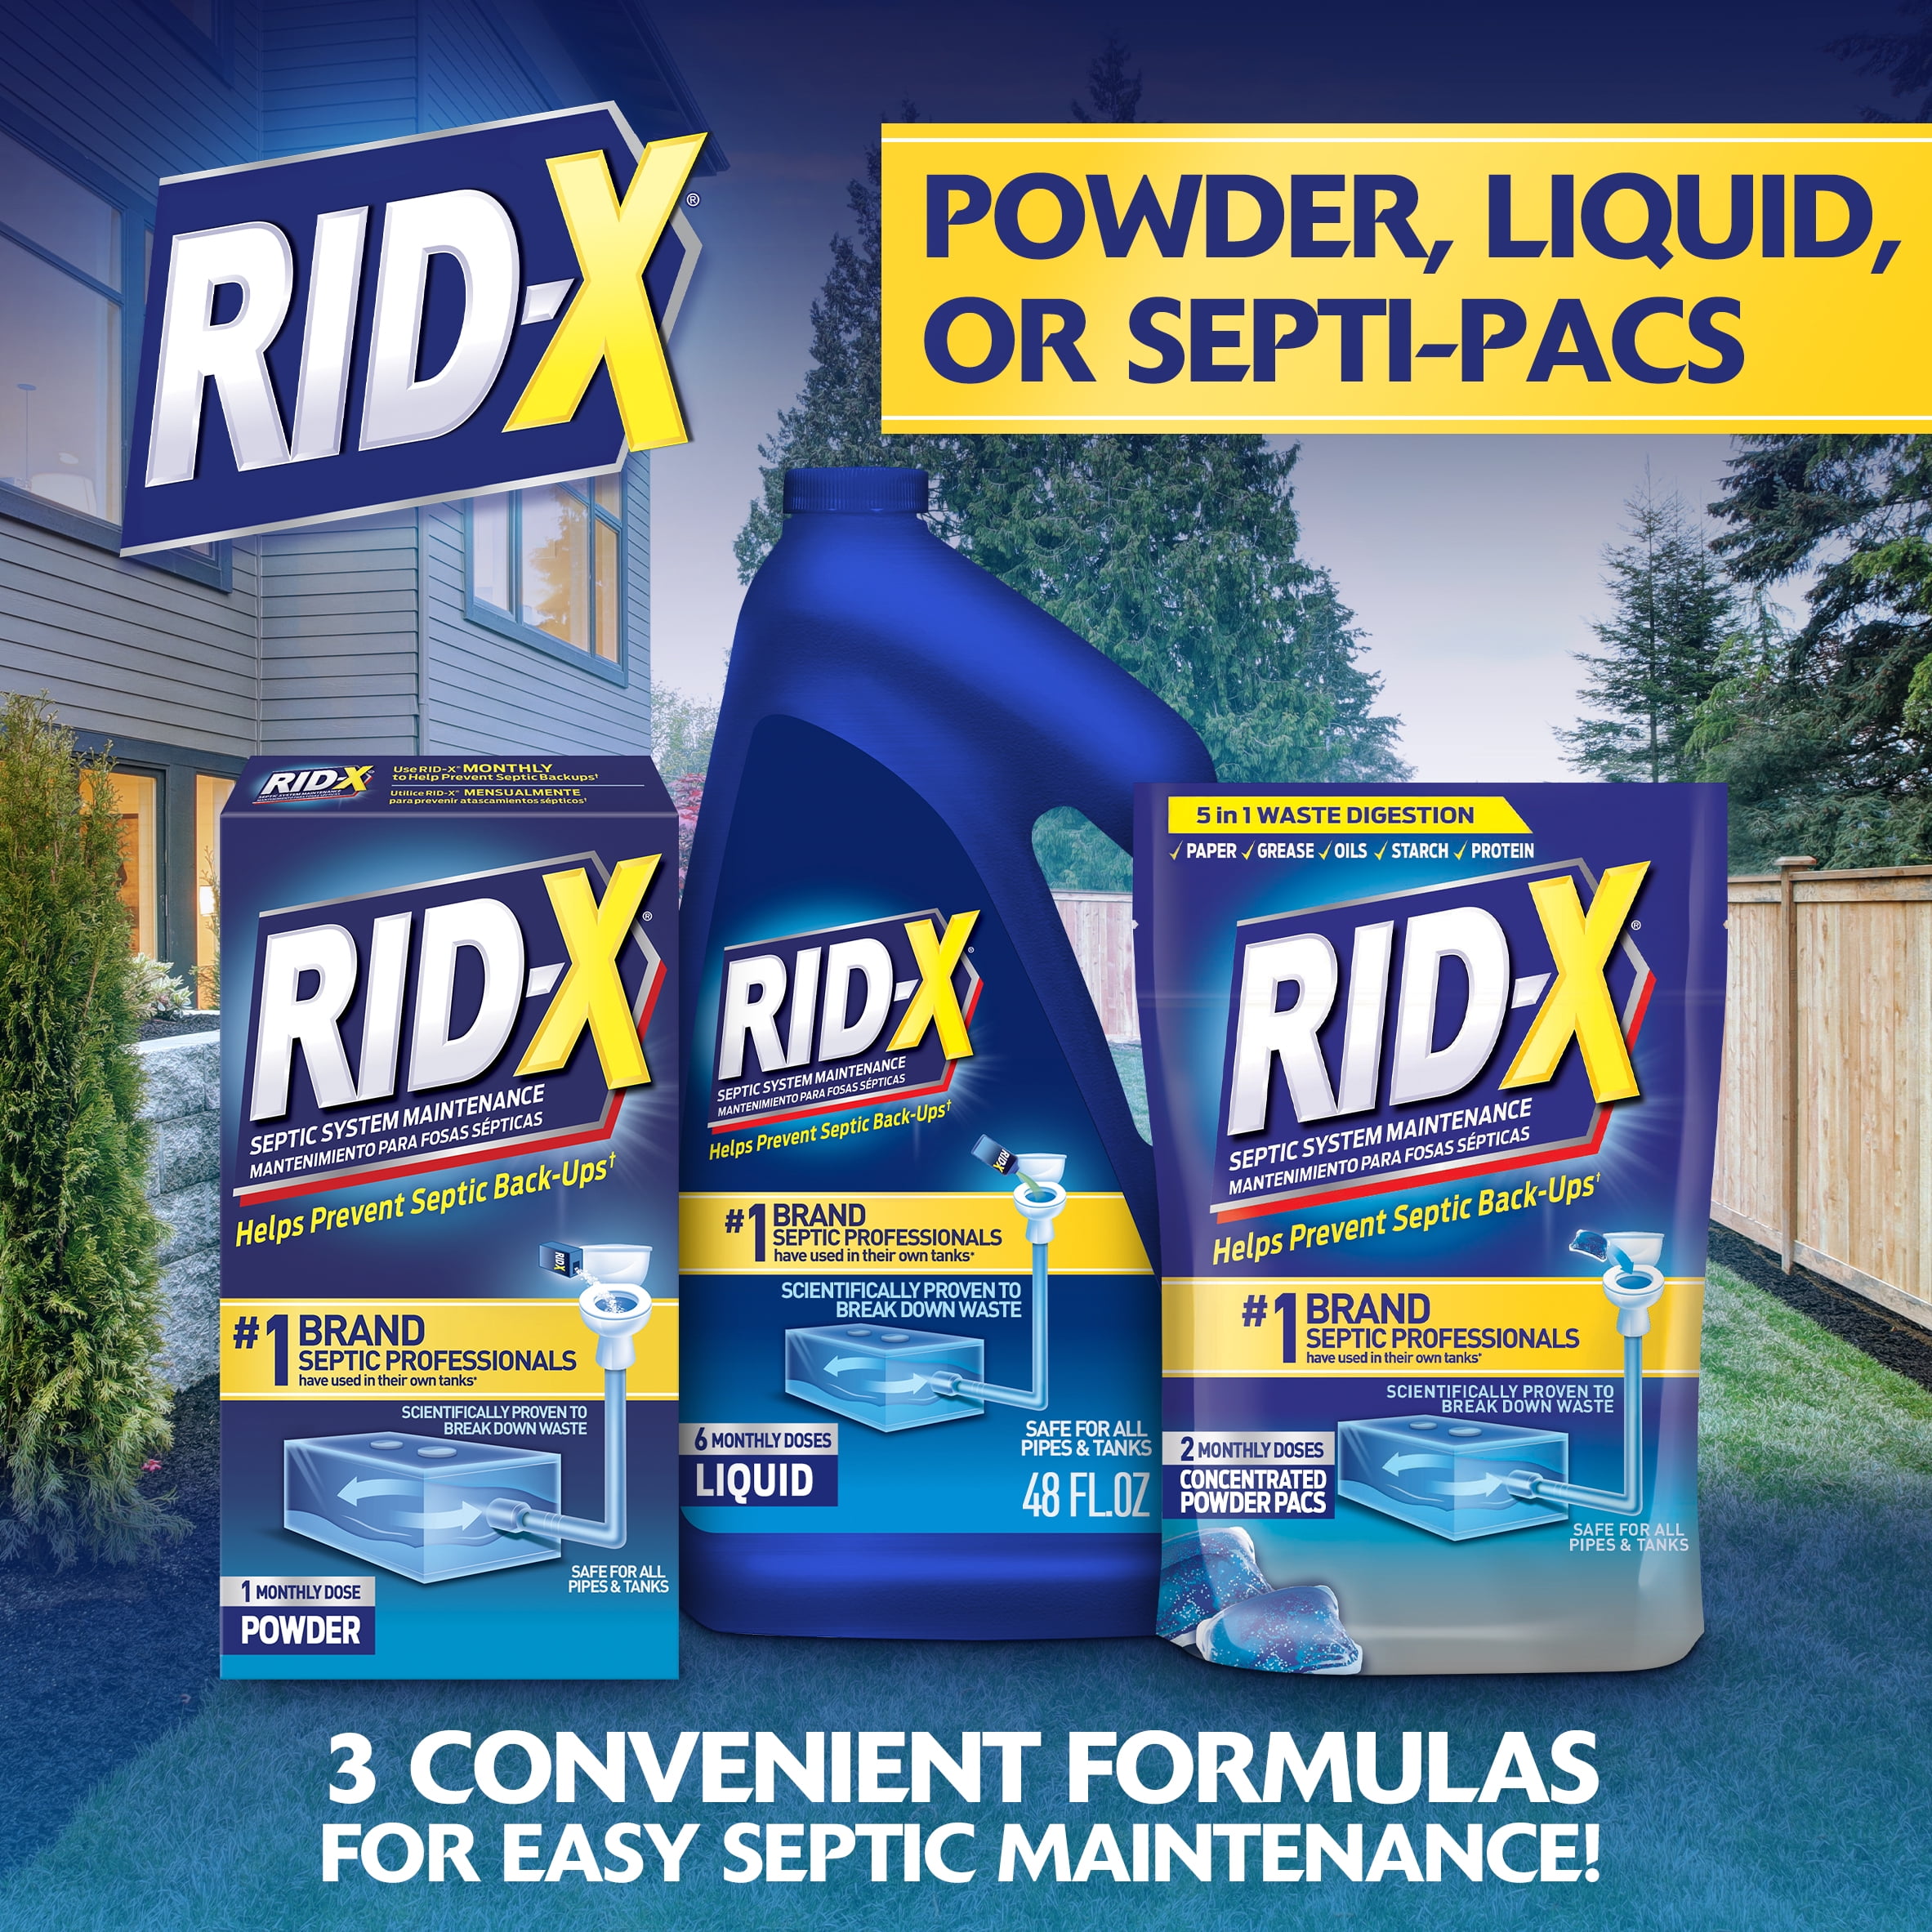  Rid-X Septic System Treatment 3-Monthly Supply Dual